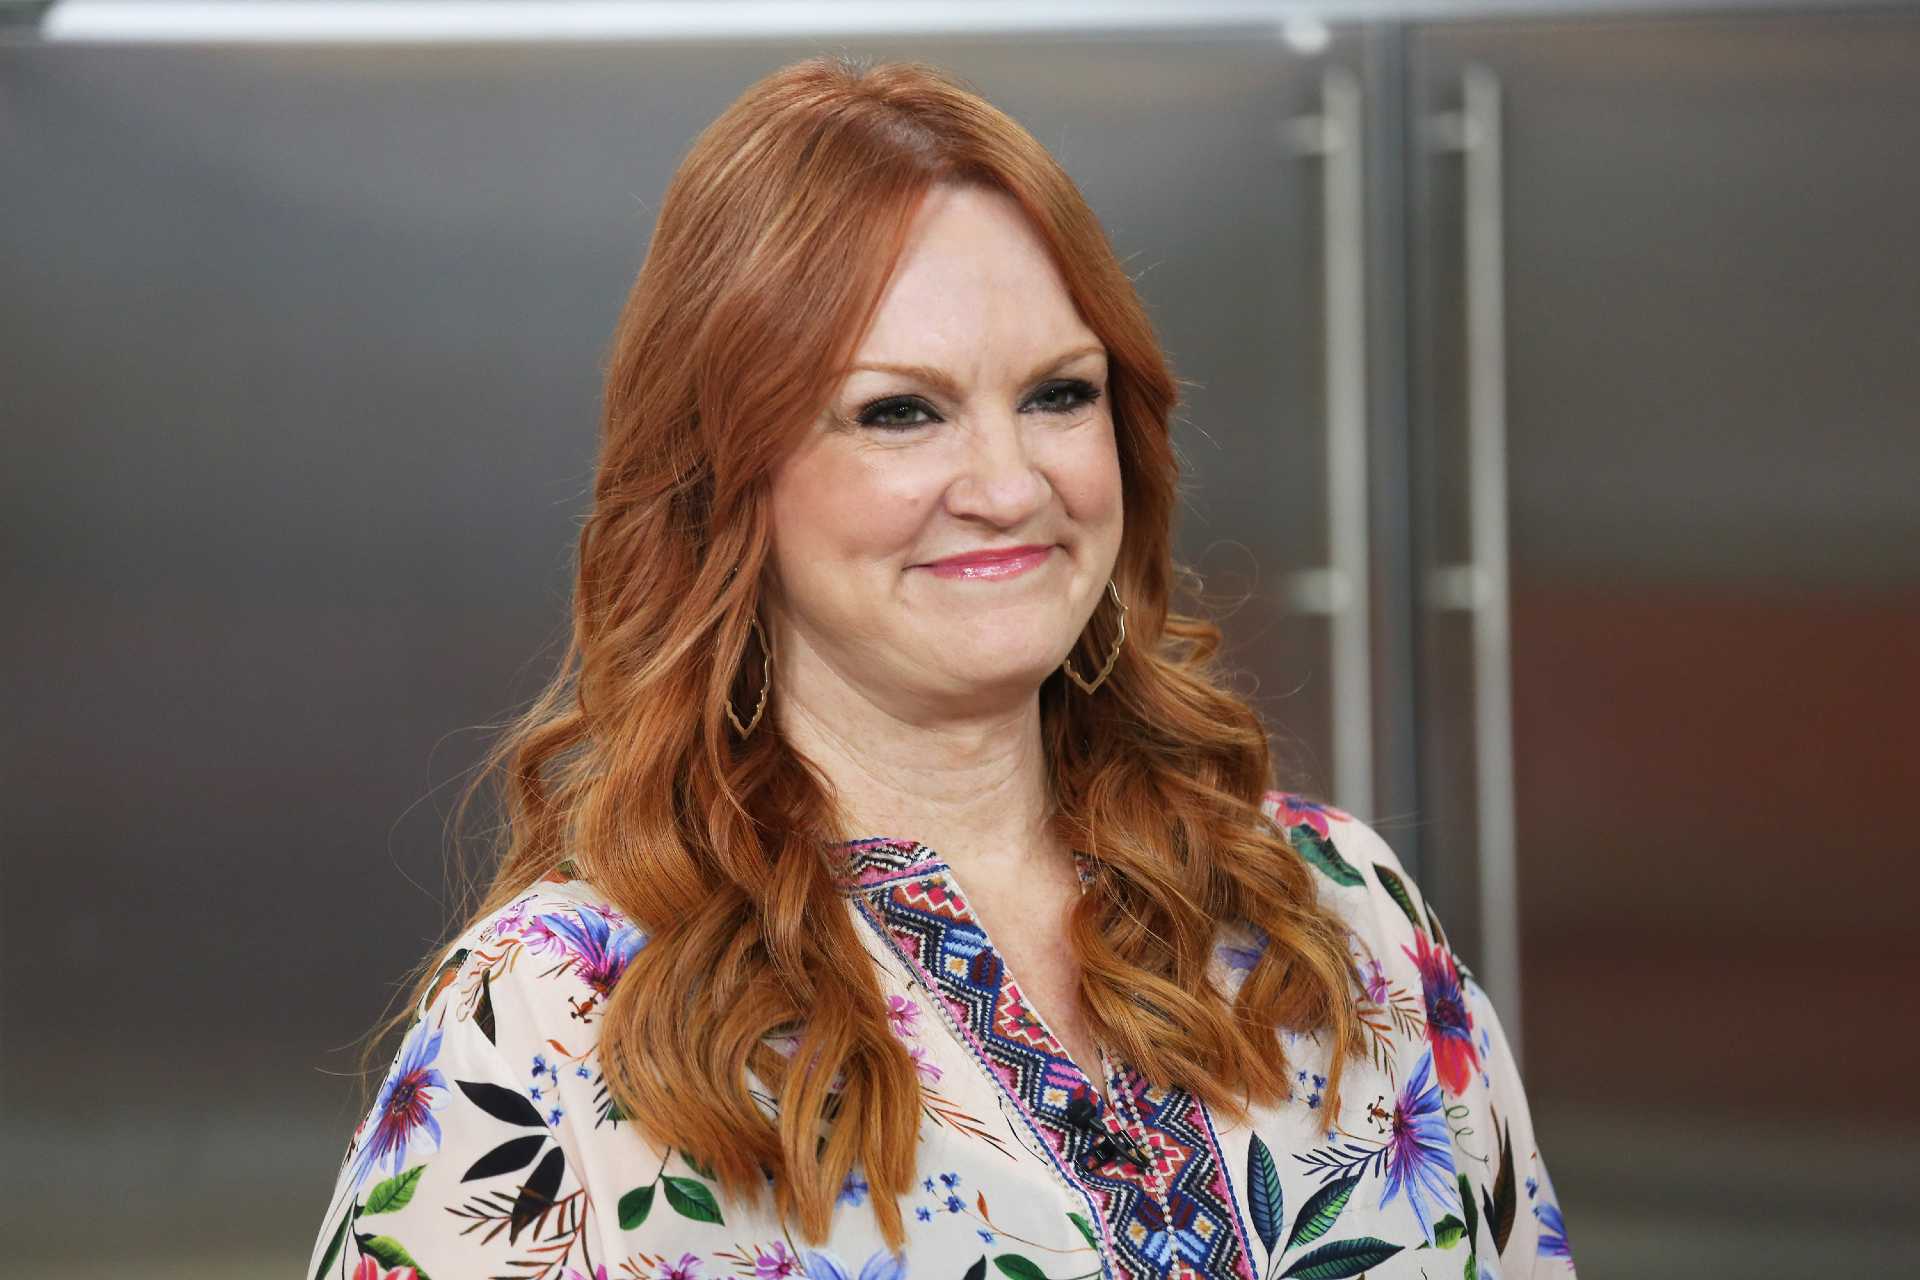 The Pioneer Woman star Ree Drummond | Tyler Essary/NBC/NBCU Photo Bank via Getty Images